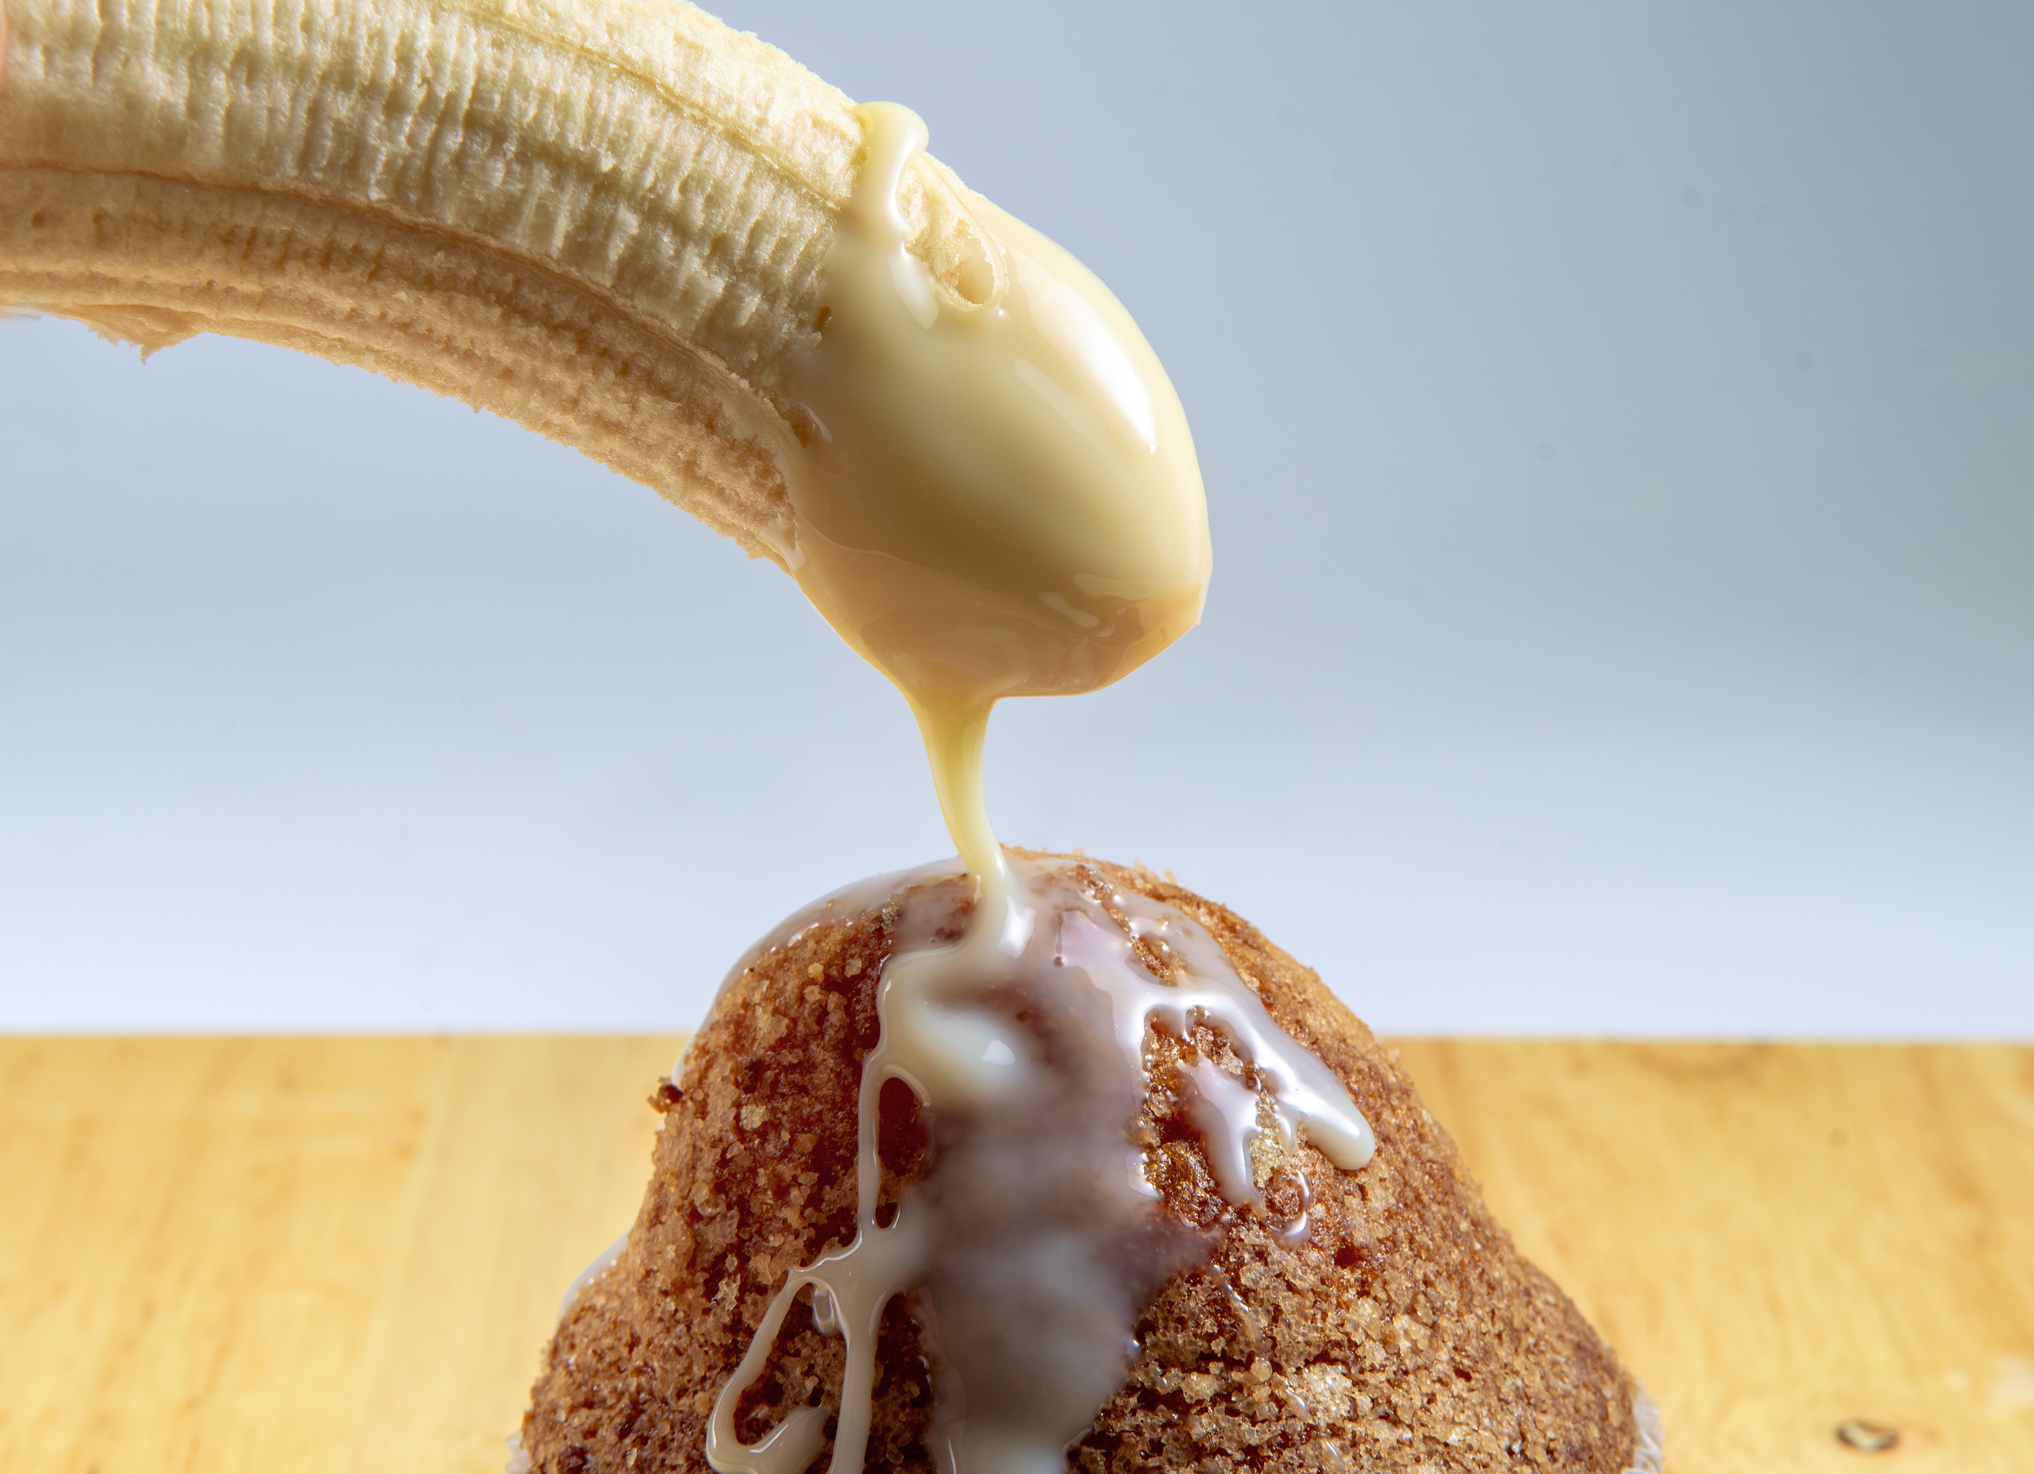 Condensed milk being poured onto a cinnamon muffin from a peeled banana